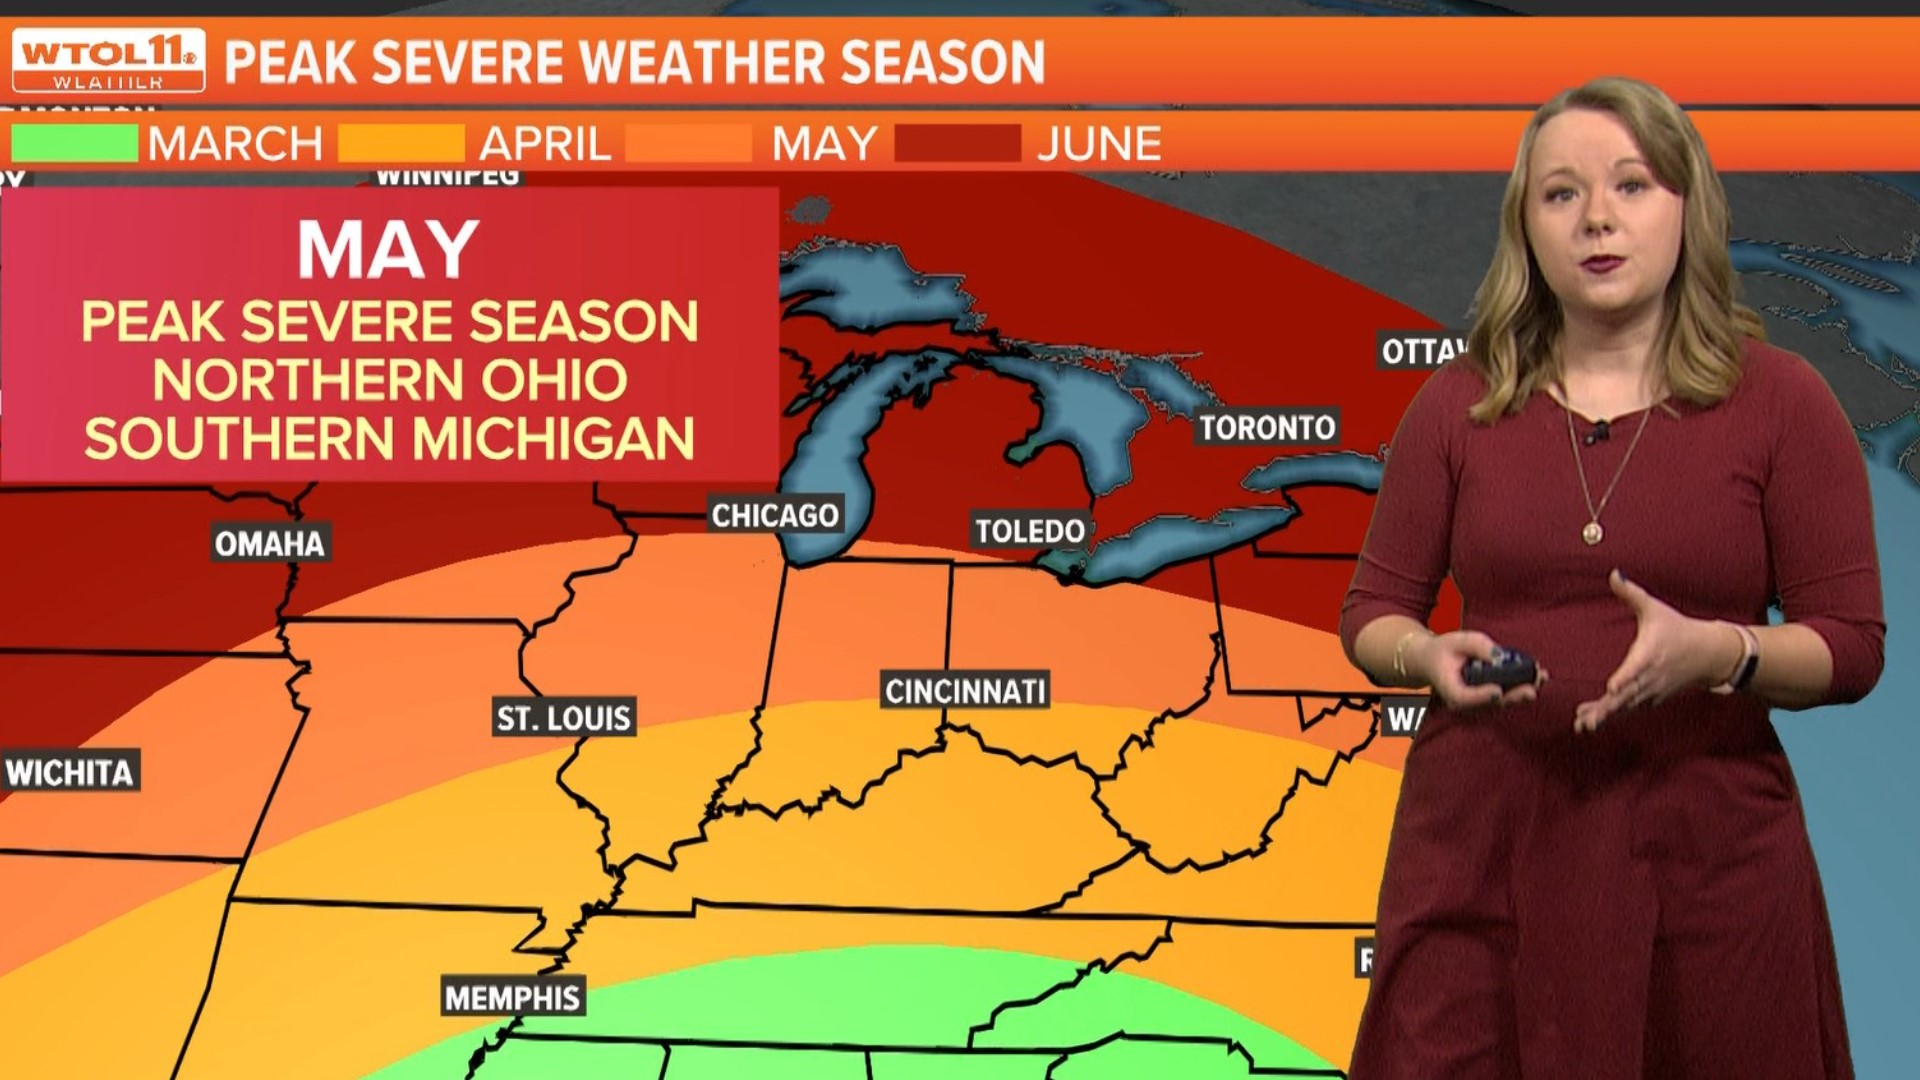 Meteorologist Kaylee Bowers looks at how the National Weather Service and the WTOL 11 Weather Team work to prepare you for severe weather events.